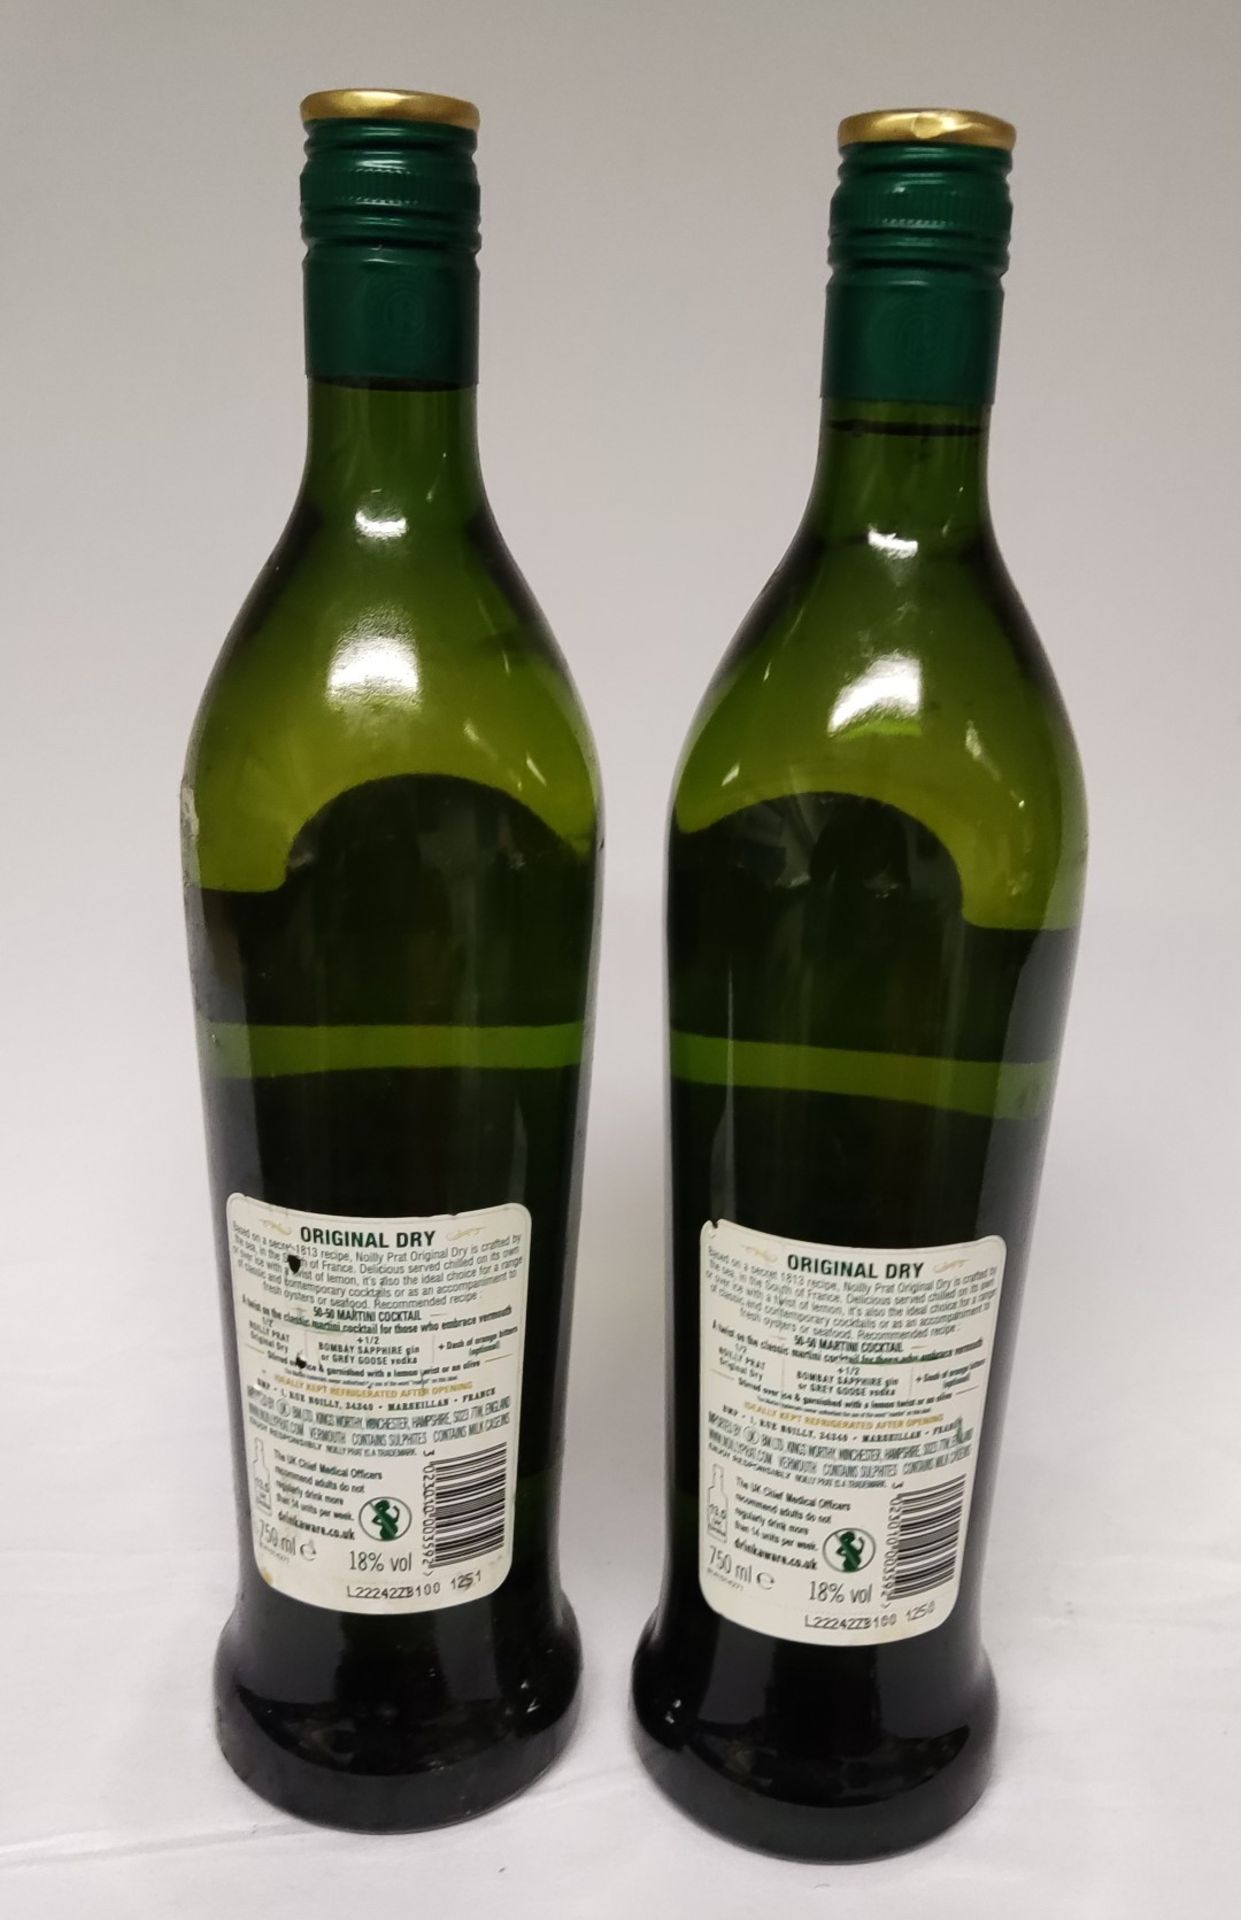 2 x Bottles of Noilly Prat Original Dry Vermouth - 18% - 750Ml Bootles - RRP £34 - Image 3 of 6